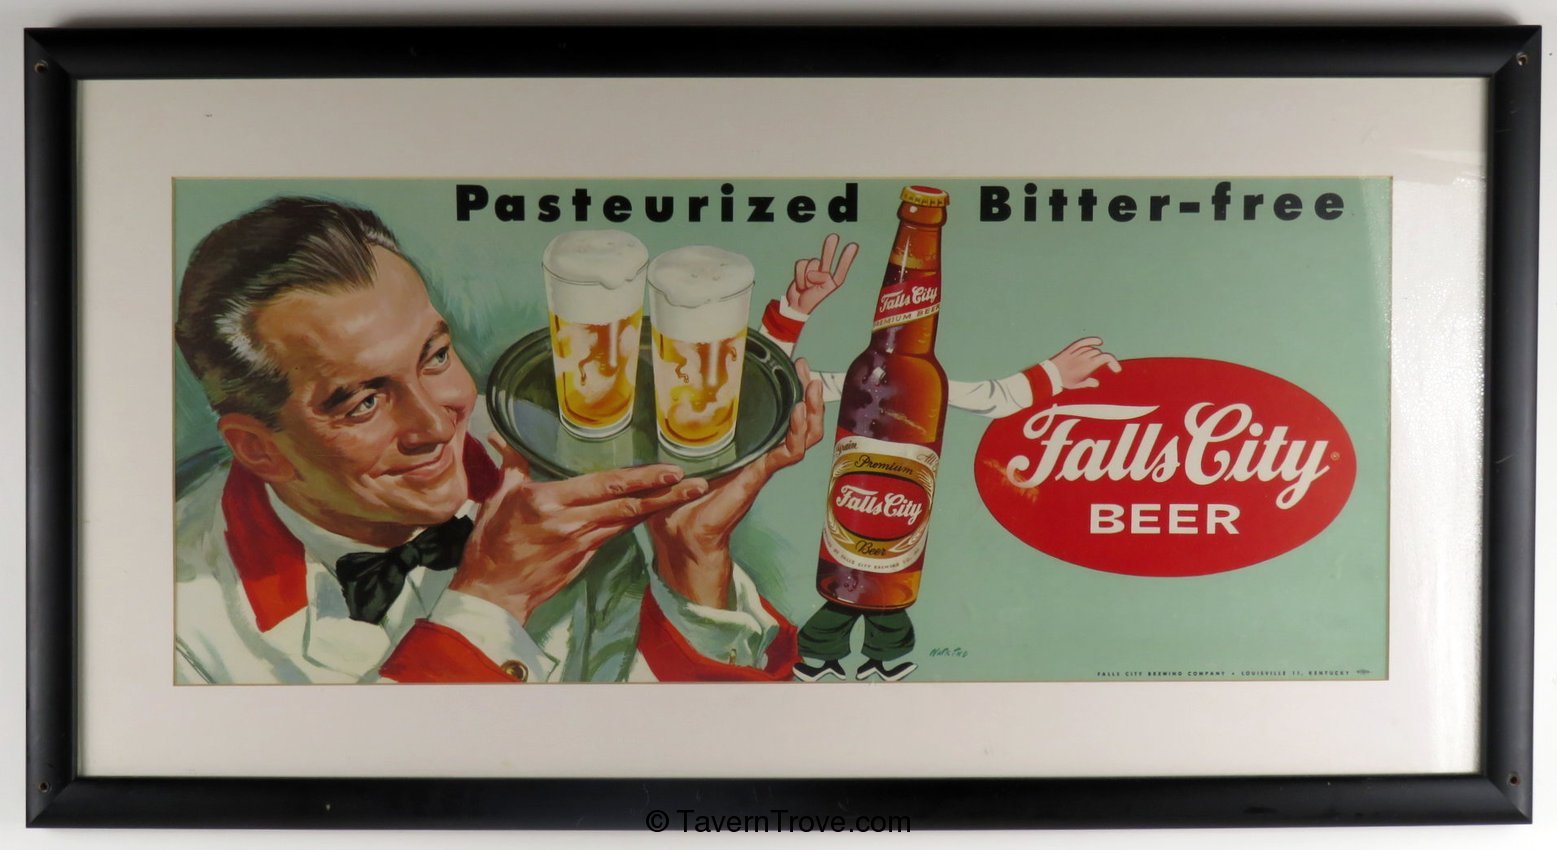 Falls City Beer trolley sign